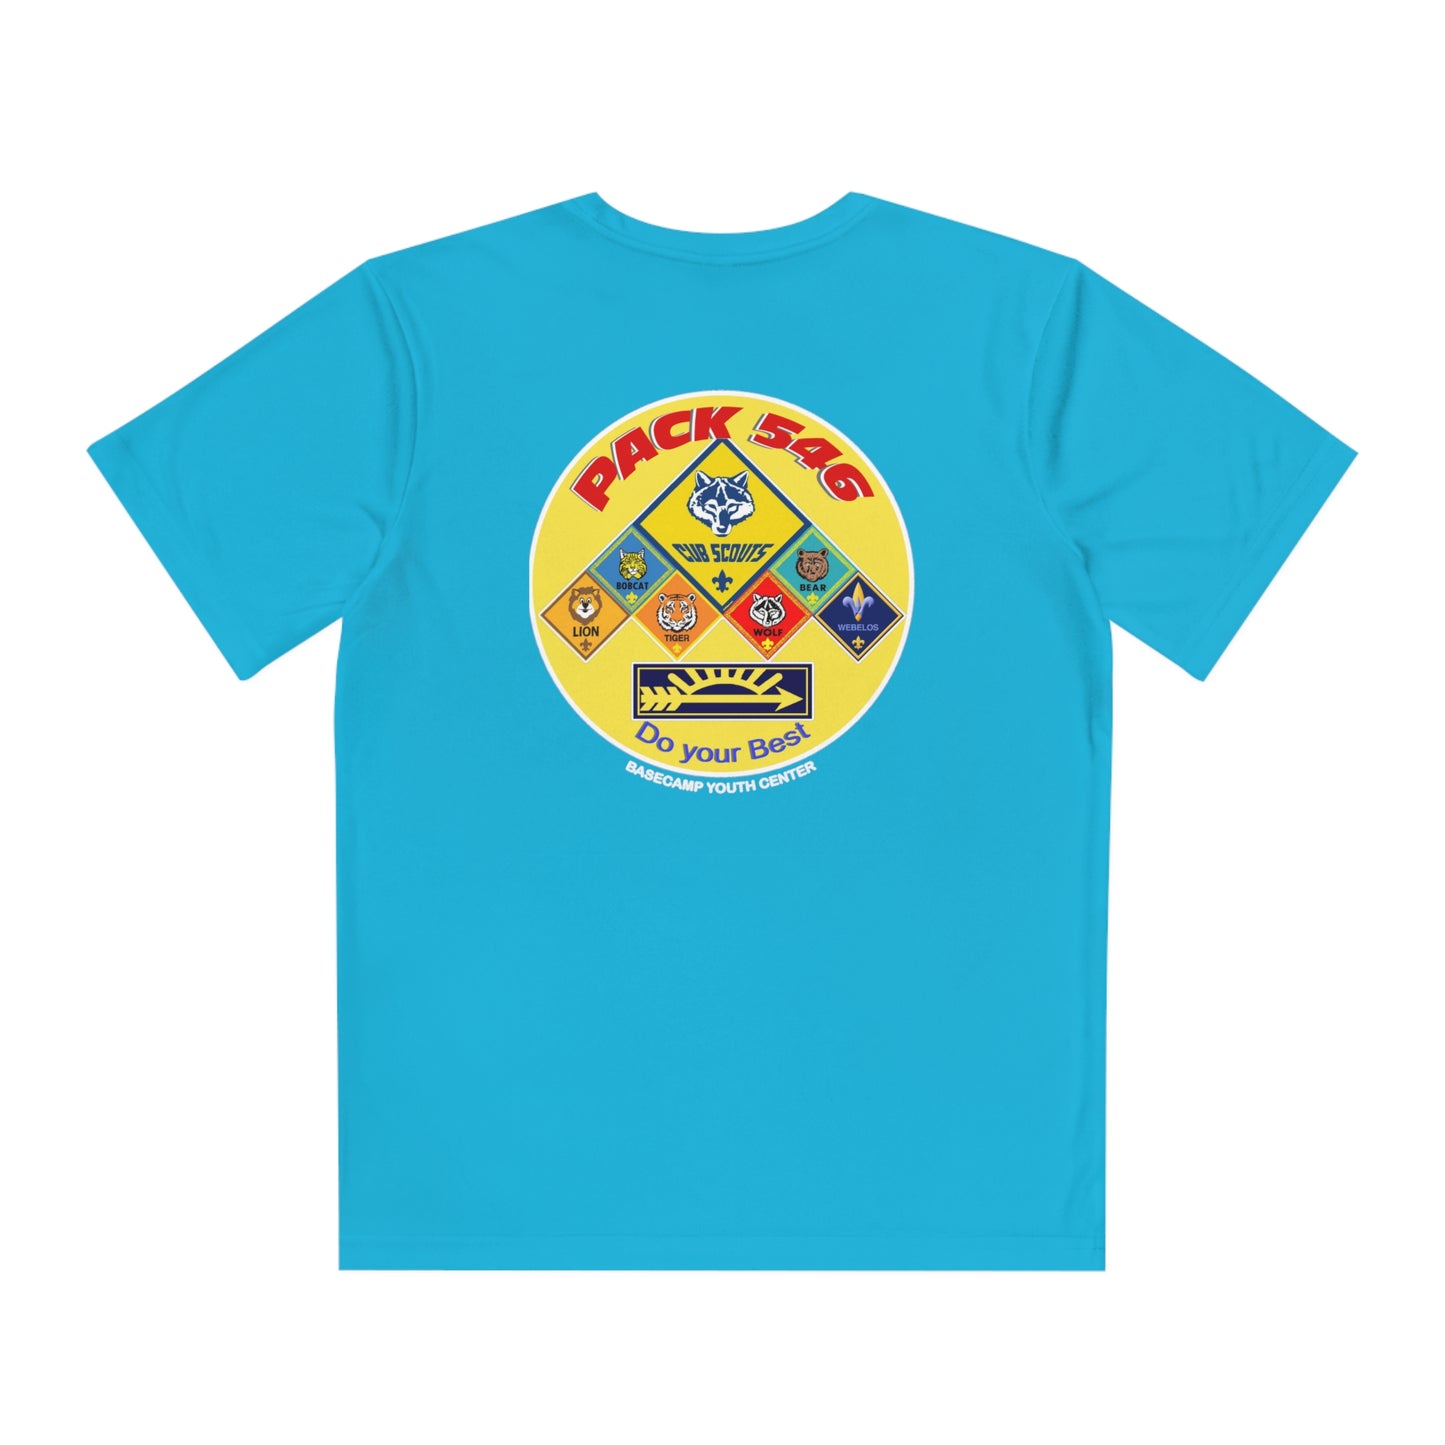 Pack 546 - Youth Wicking Tee